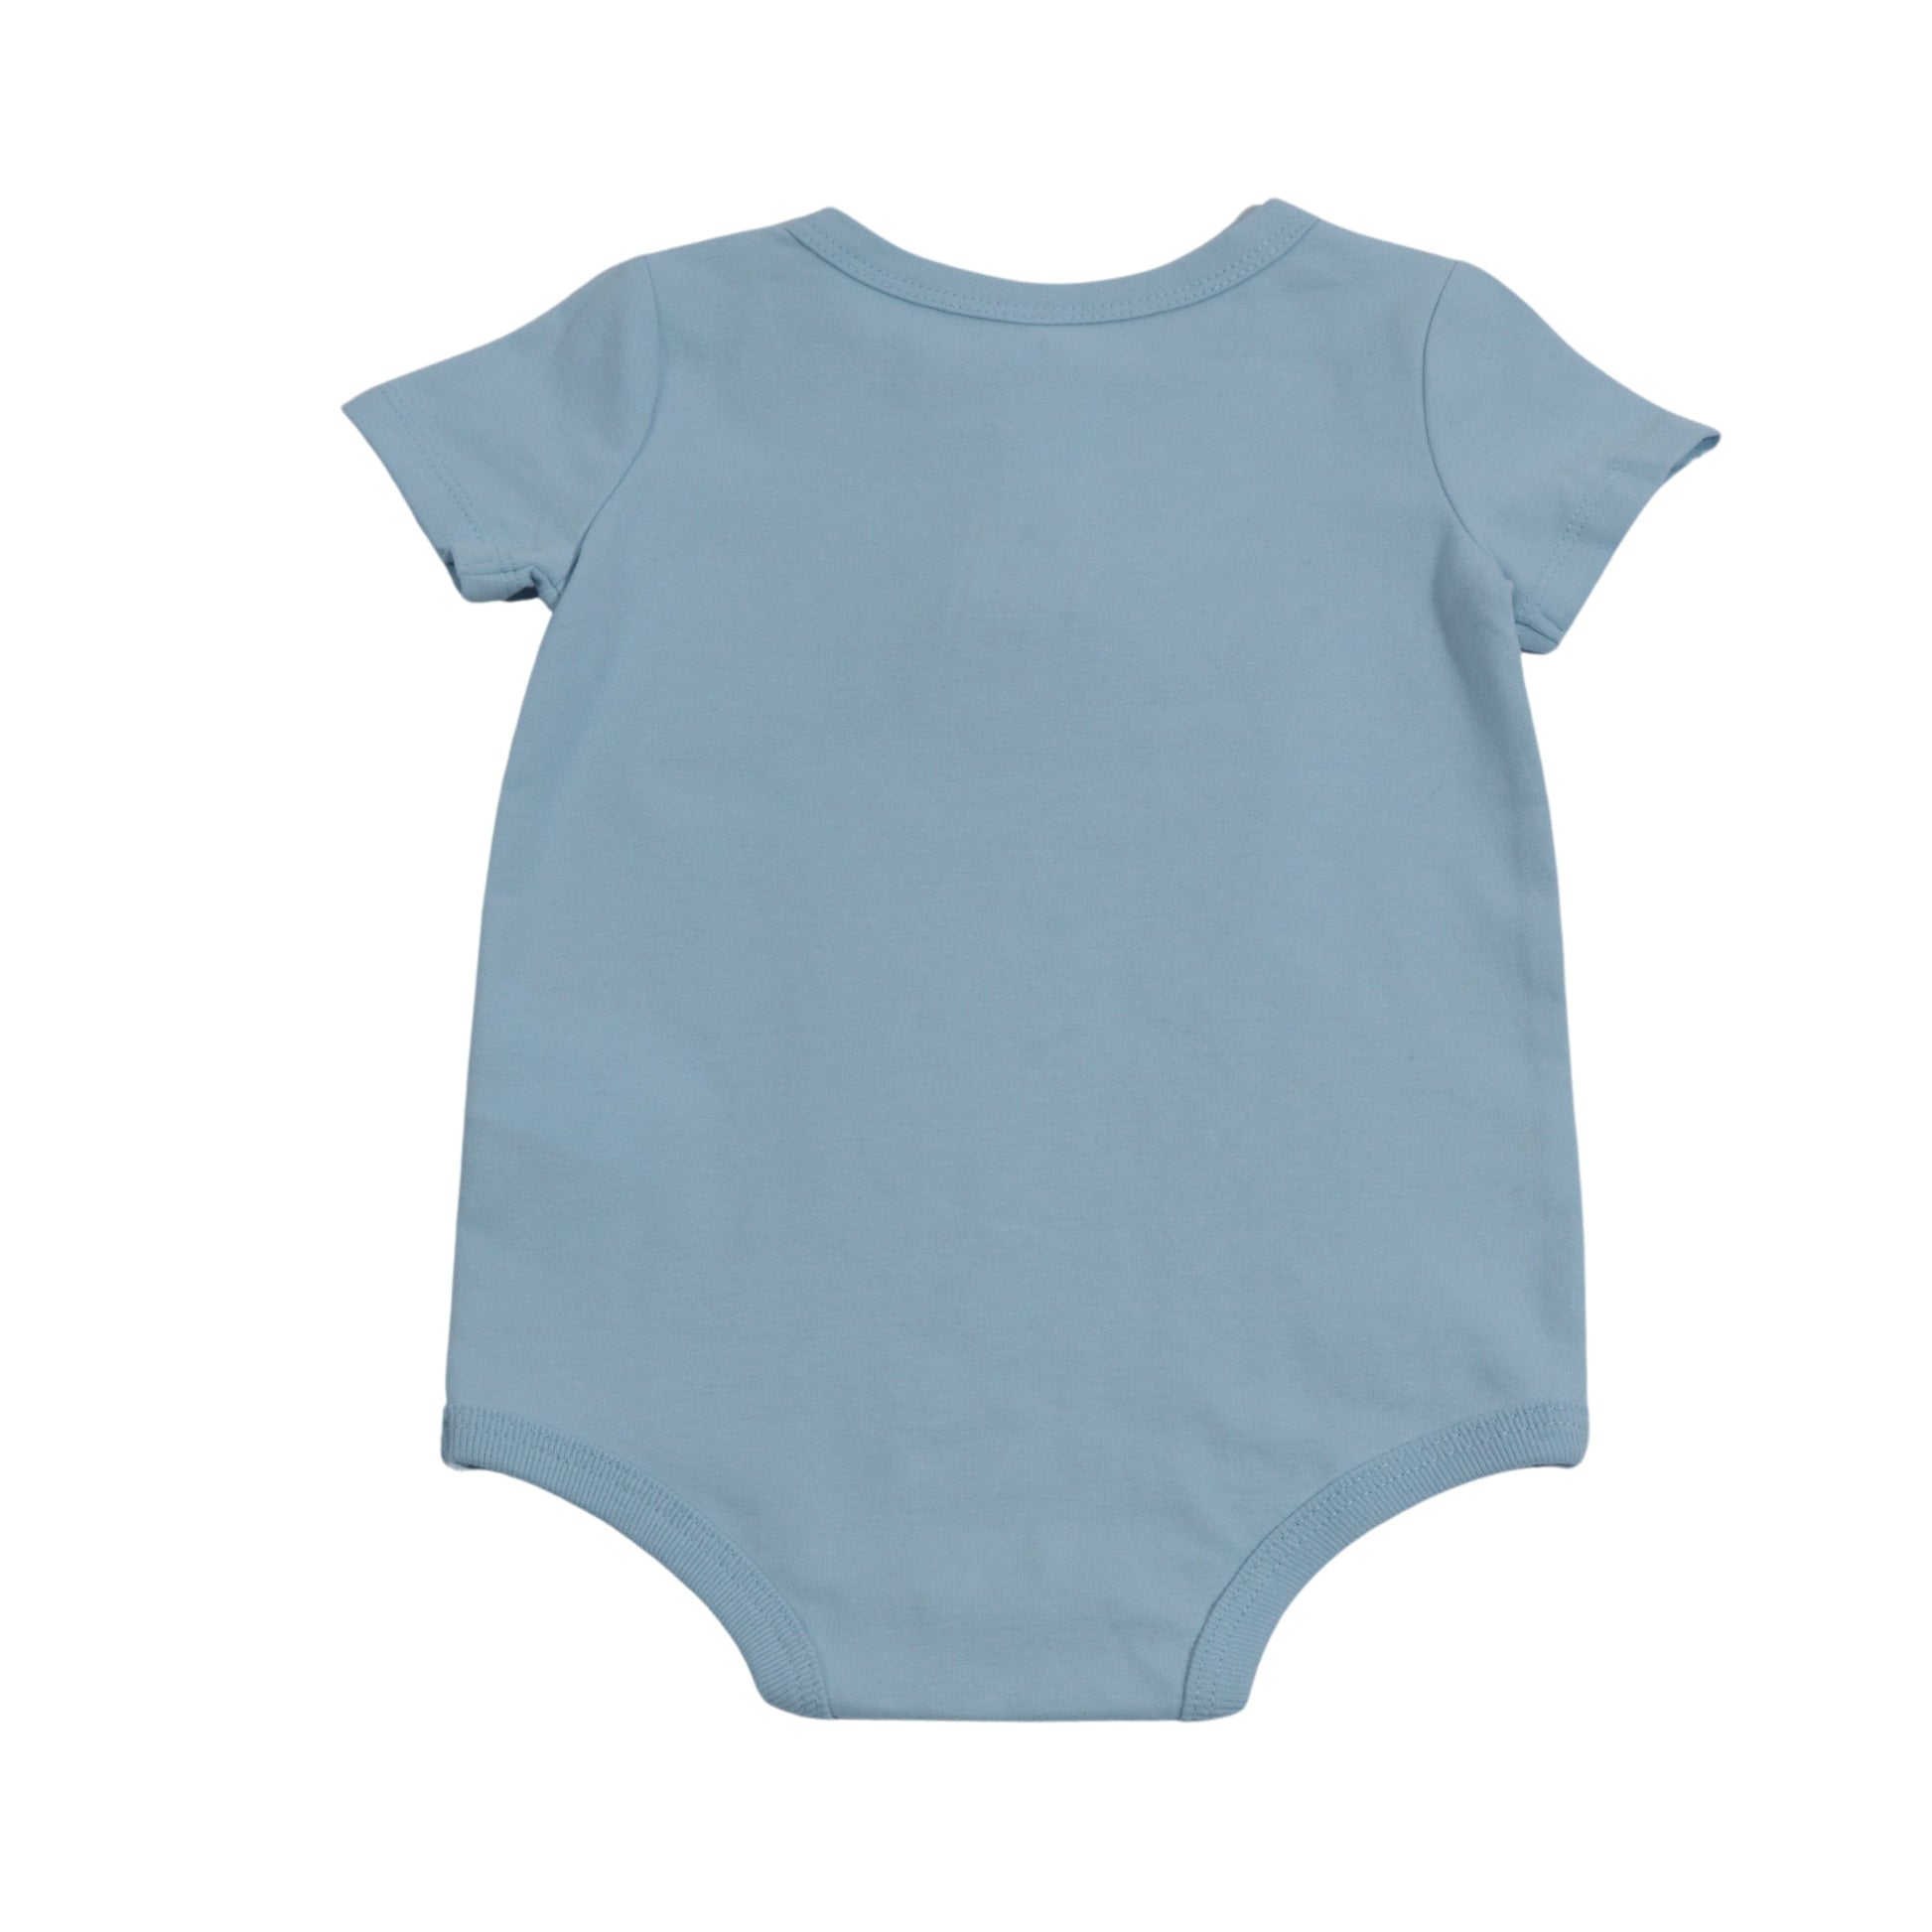 COTTON ON Baby Boy 6-12 Month / Blue COTTON ON - BABY - Printed Overall